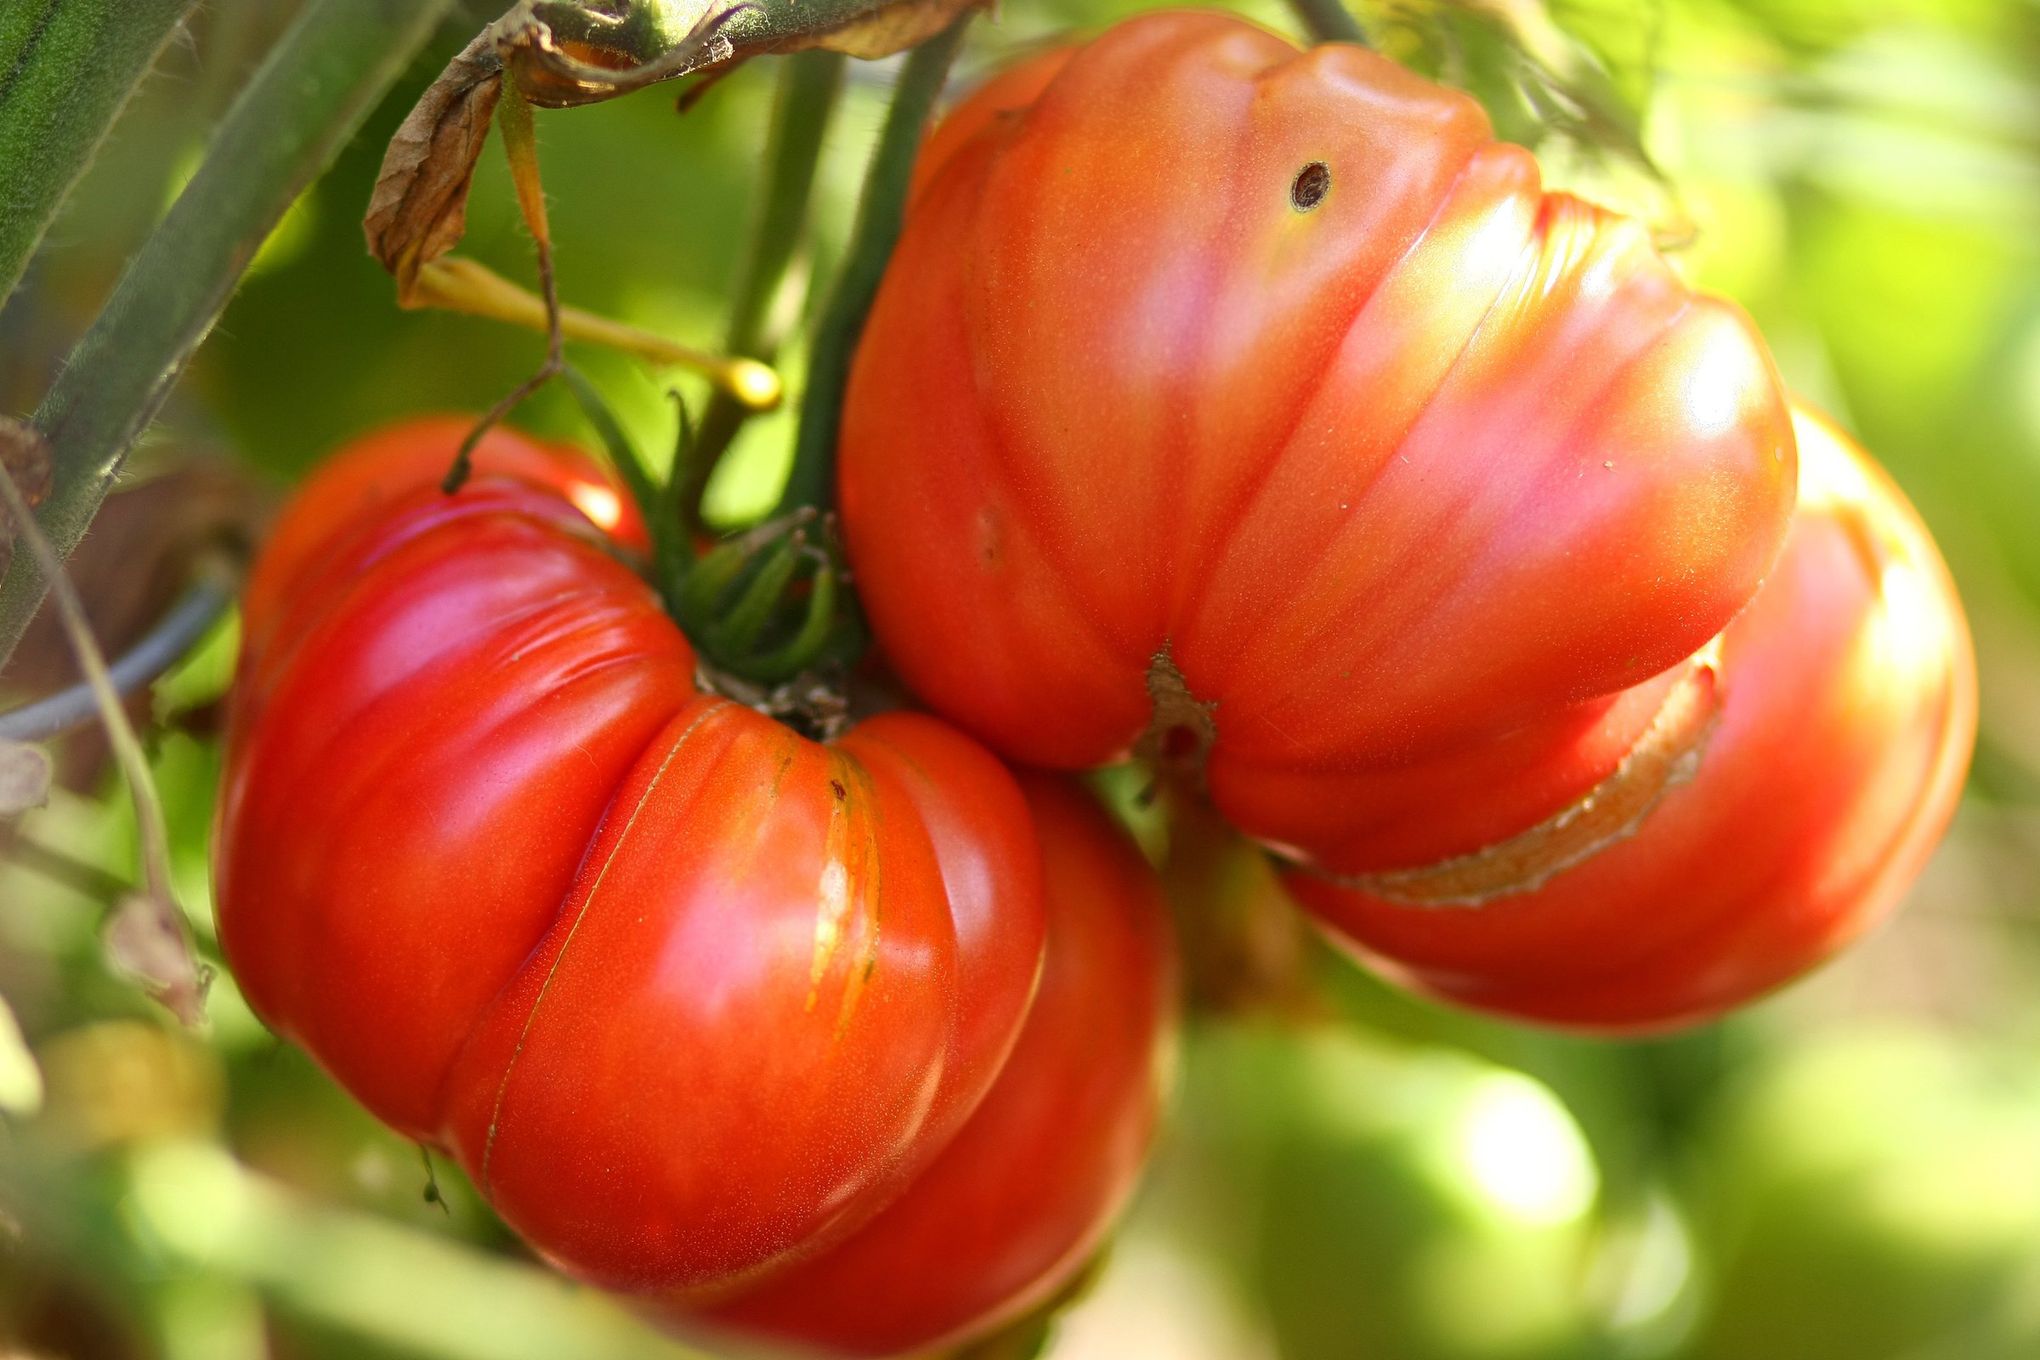 Late-season garden hacks for pulling every last tomato from the